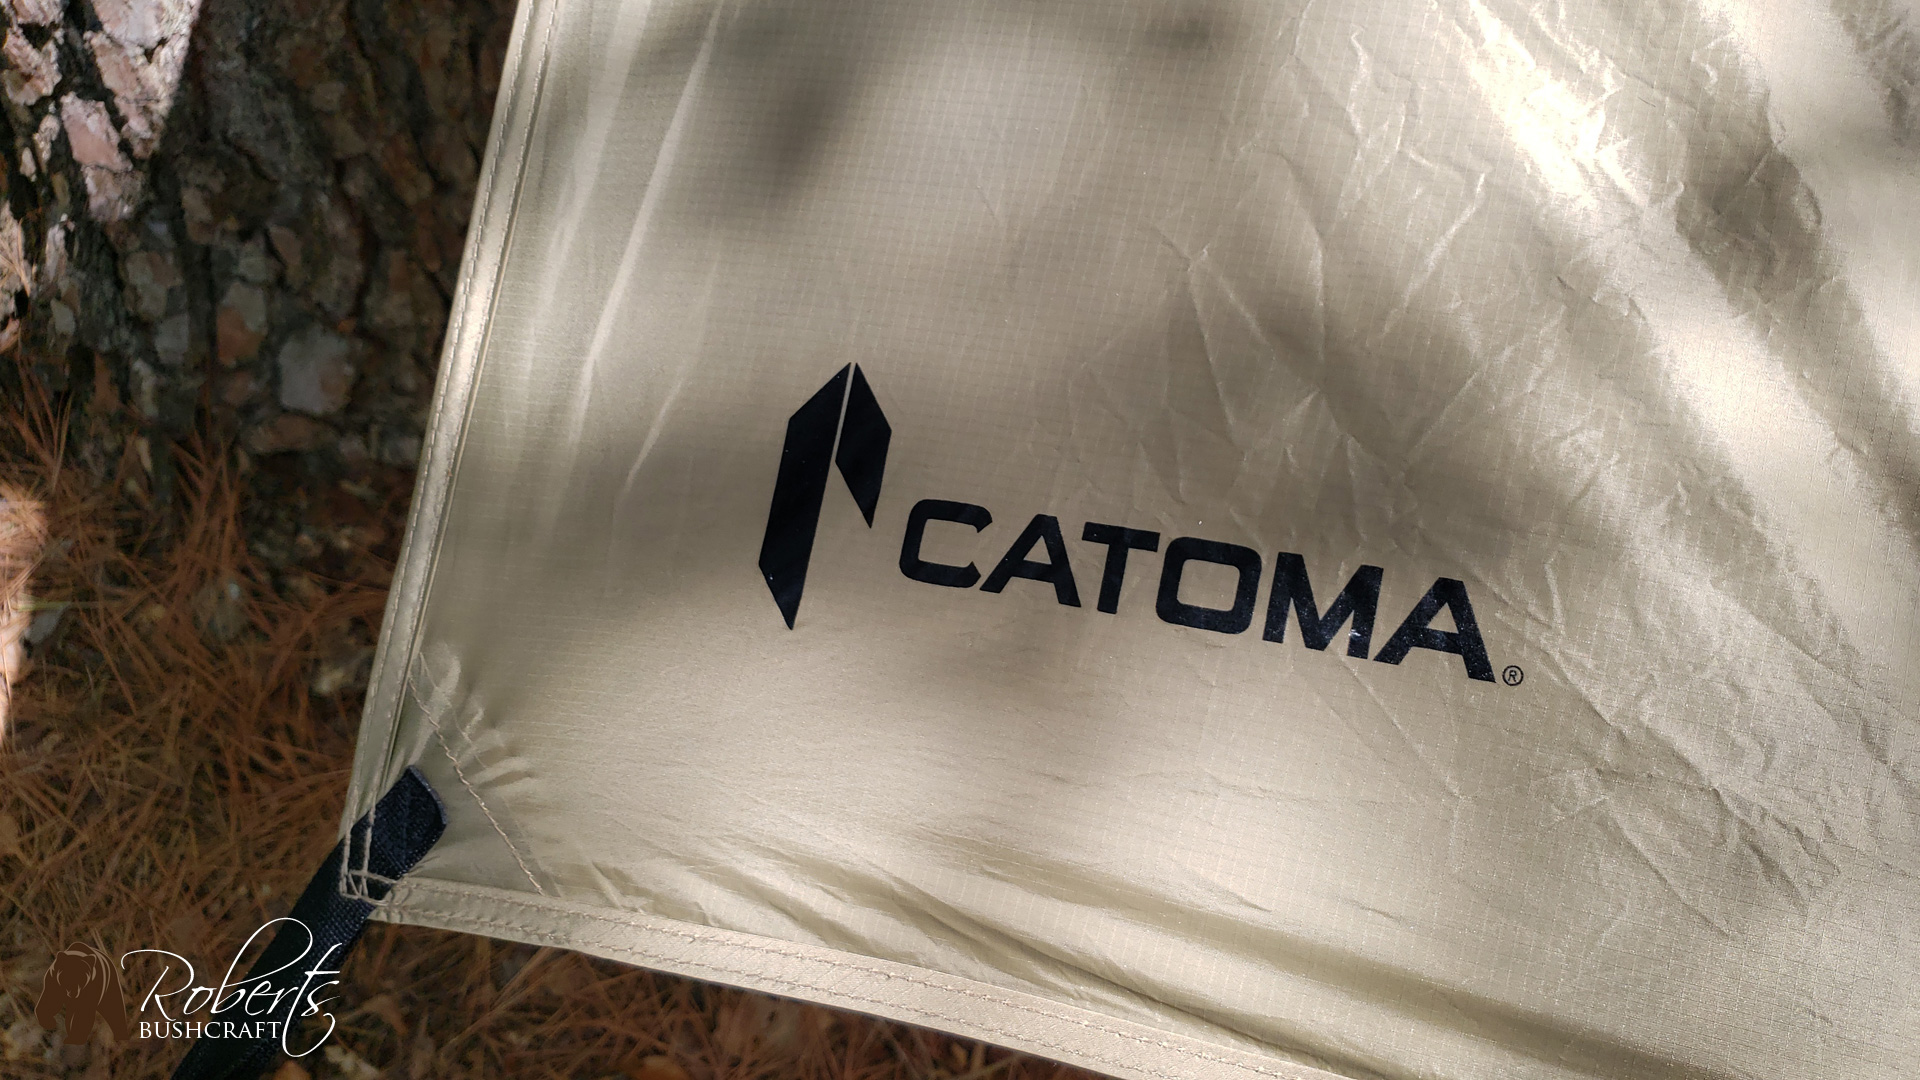 Overnight camping on the river in a Catoma bednet